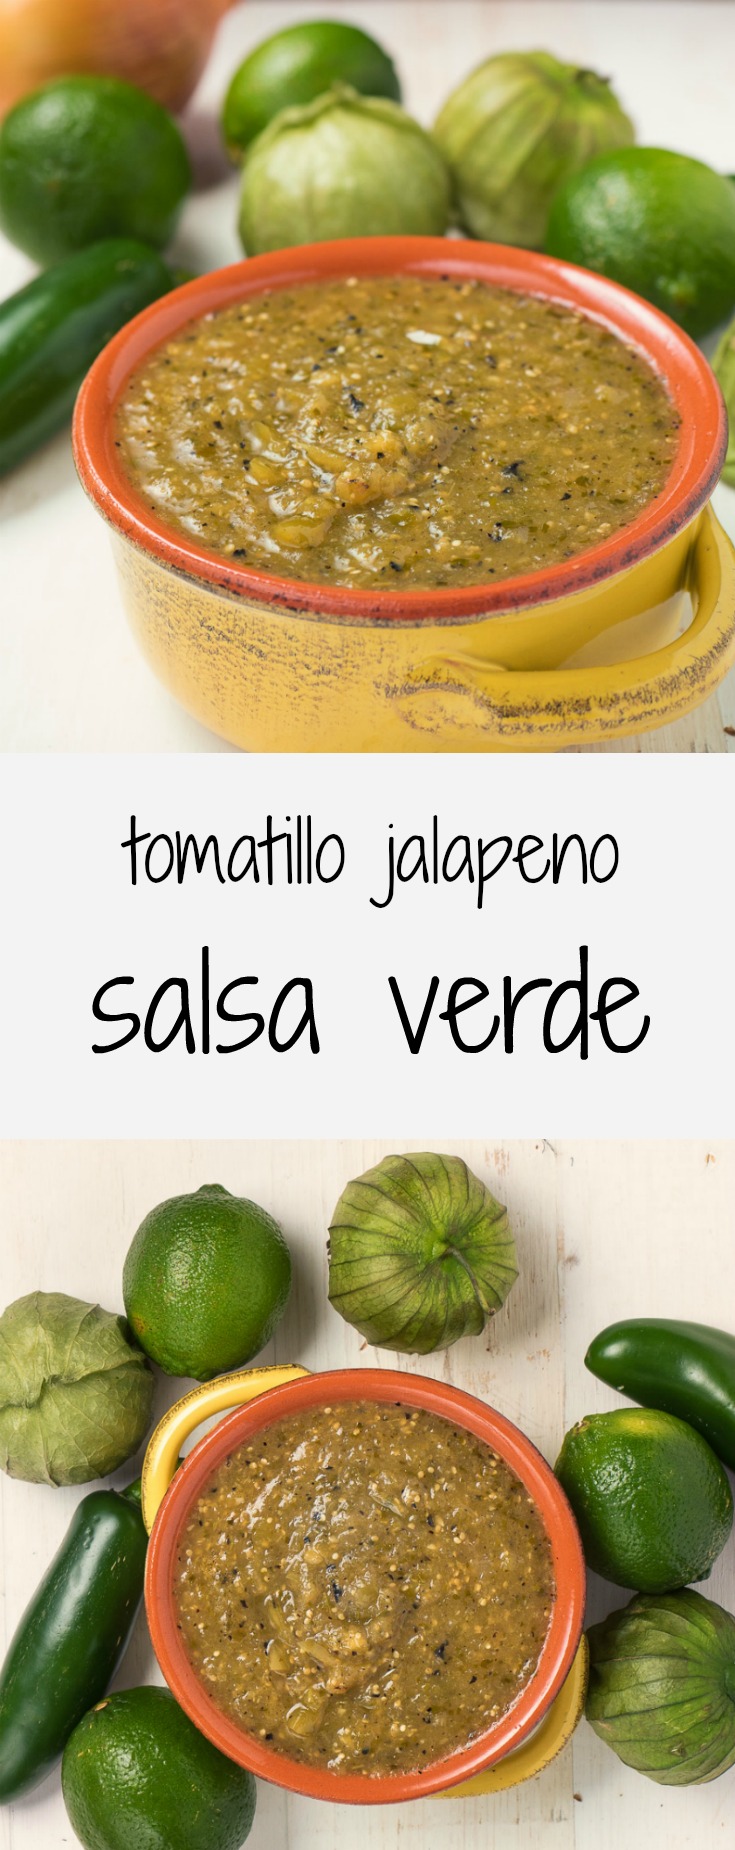 This tomatillo salsa or salsa verde is awesome on its own or with roasted chicken or pork.